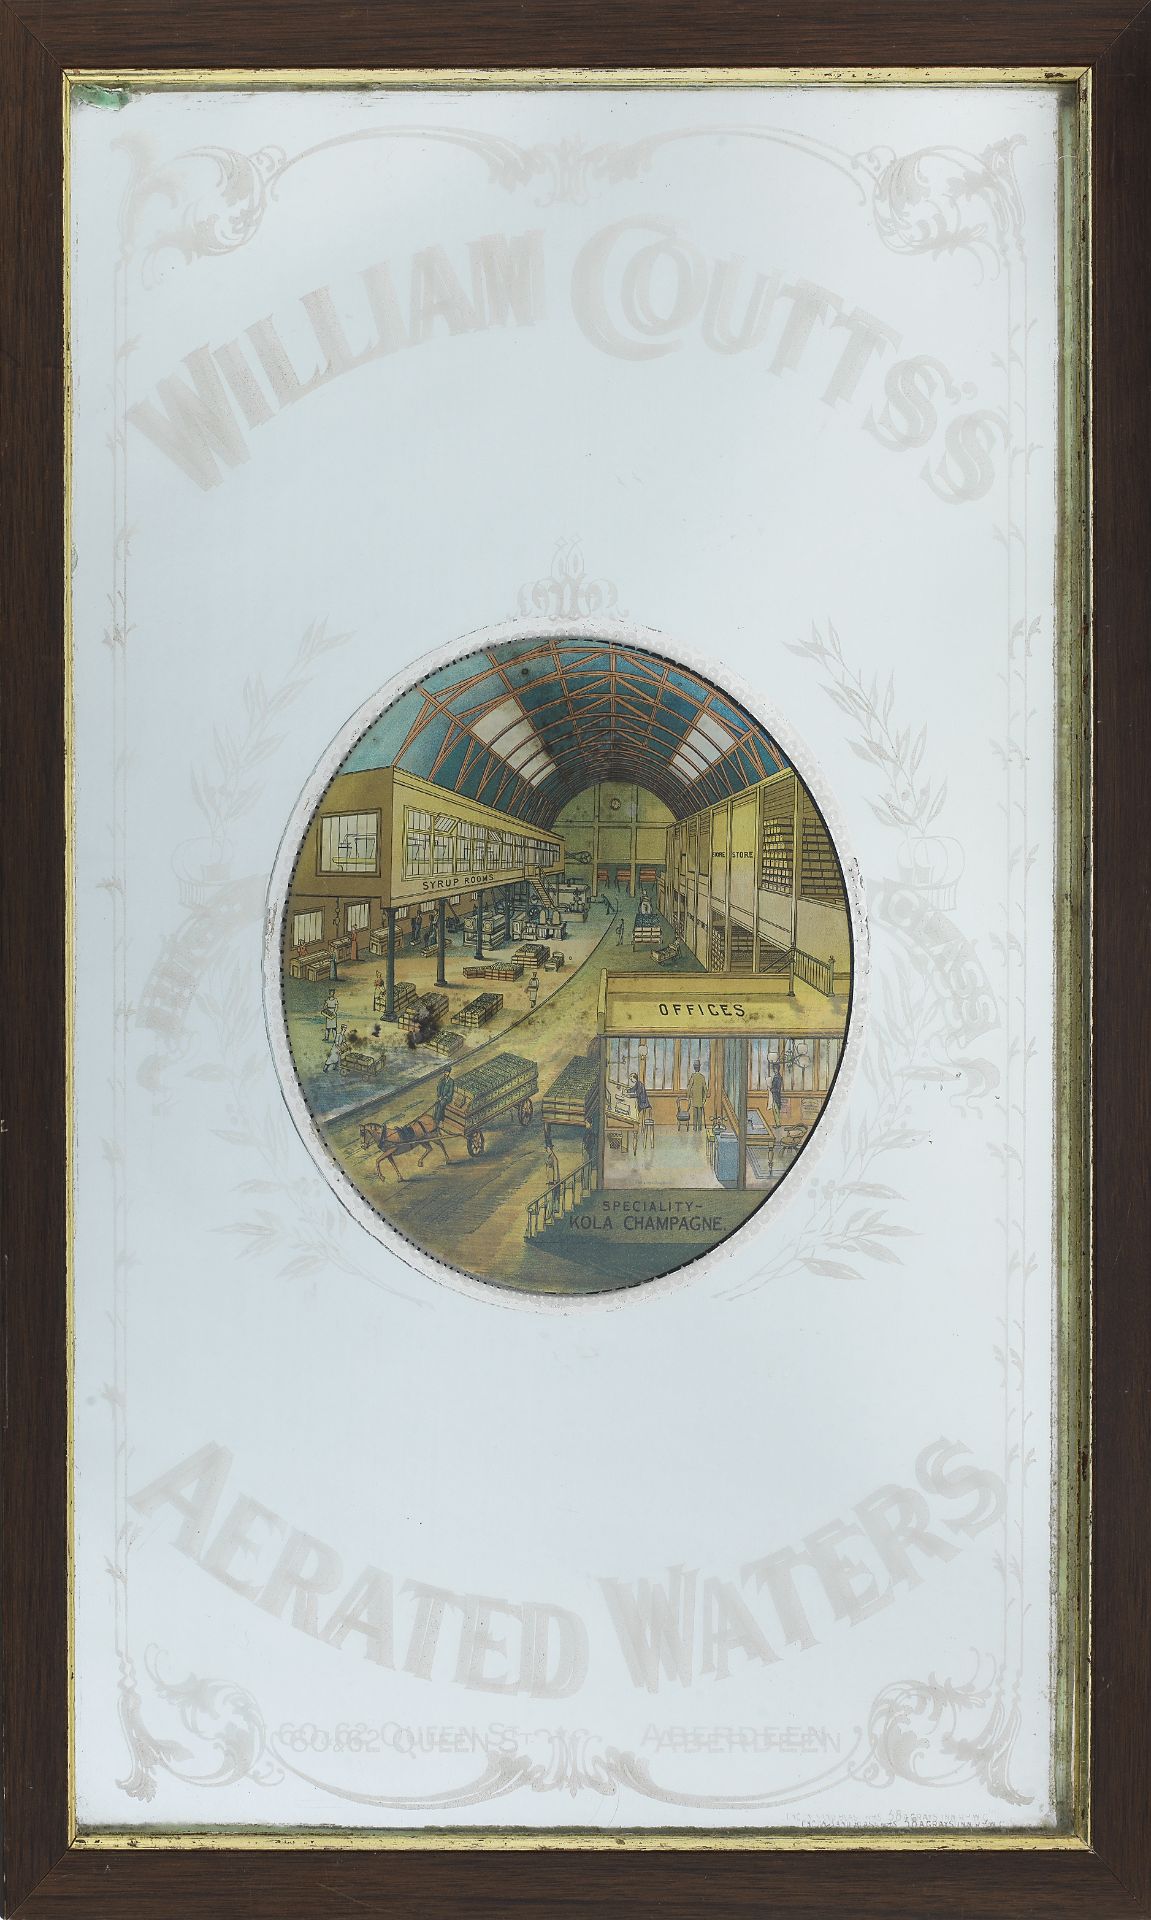 Of Aberdeen Interest: An advertising mirror for 'William Coutts Aerated Waters'